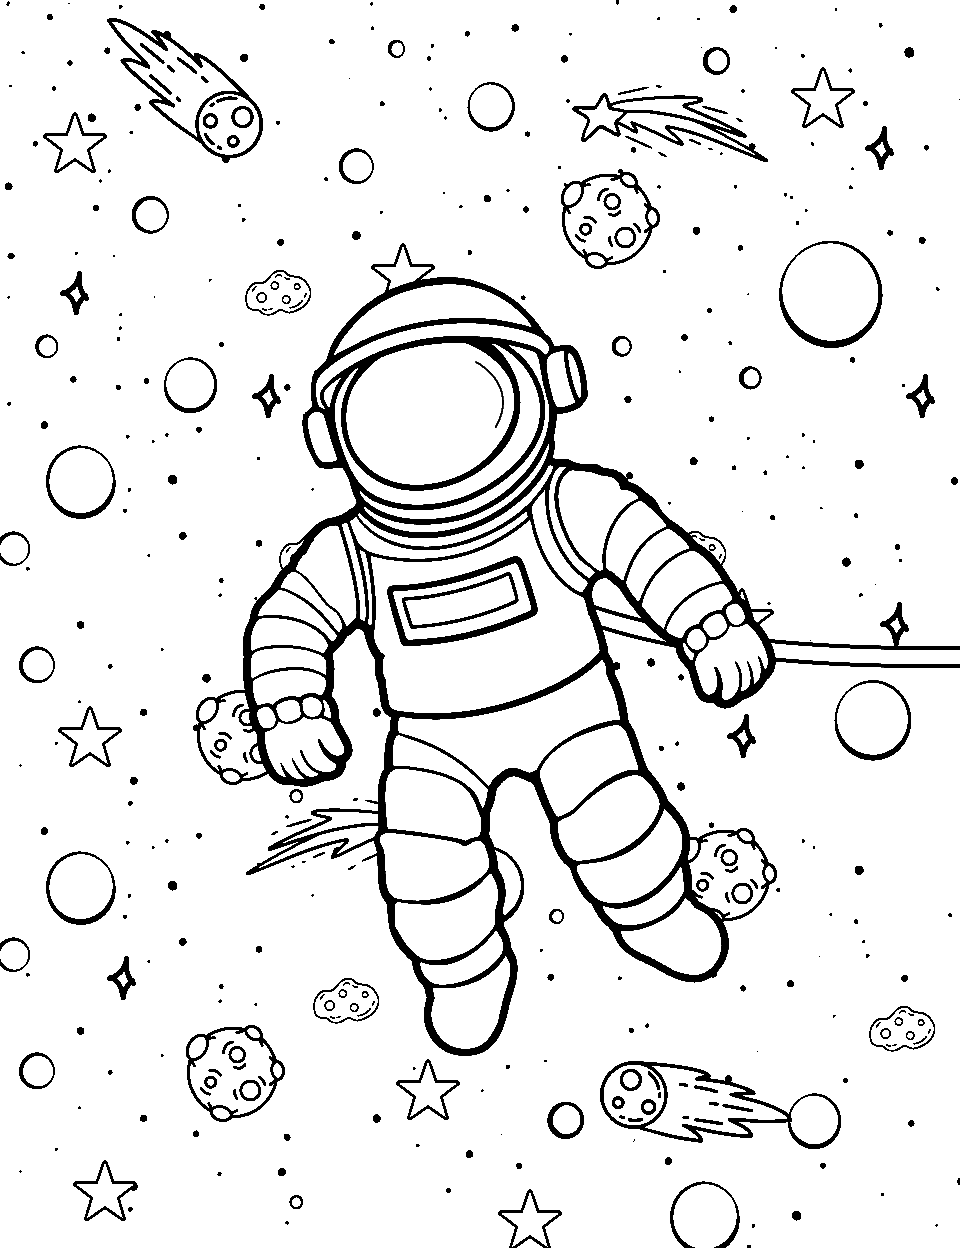 Spacewalking Astronaut Coloring Page - An astronaut floating in space.